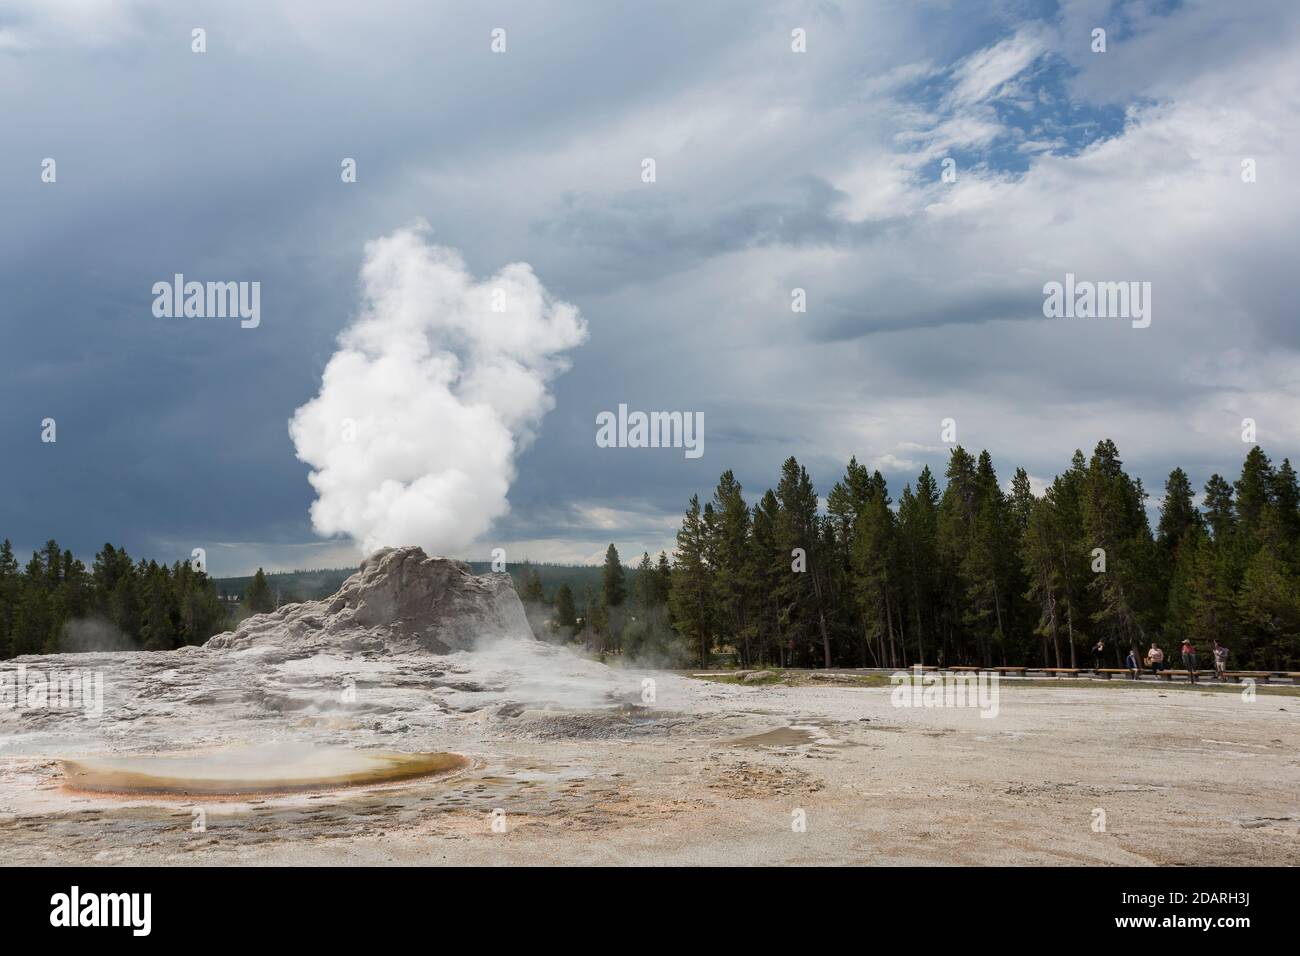 Castle Geyser emits a steam plume as visitors watch from a distance in Yellowstone National Park, Wyoming on Monday, August 3, 2020. The park recently Stock Photo